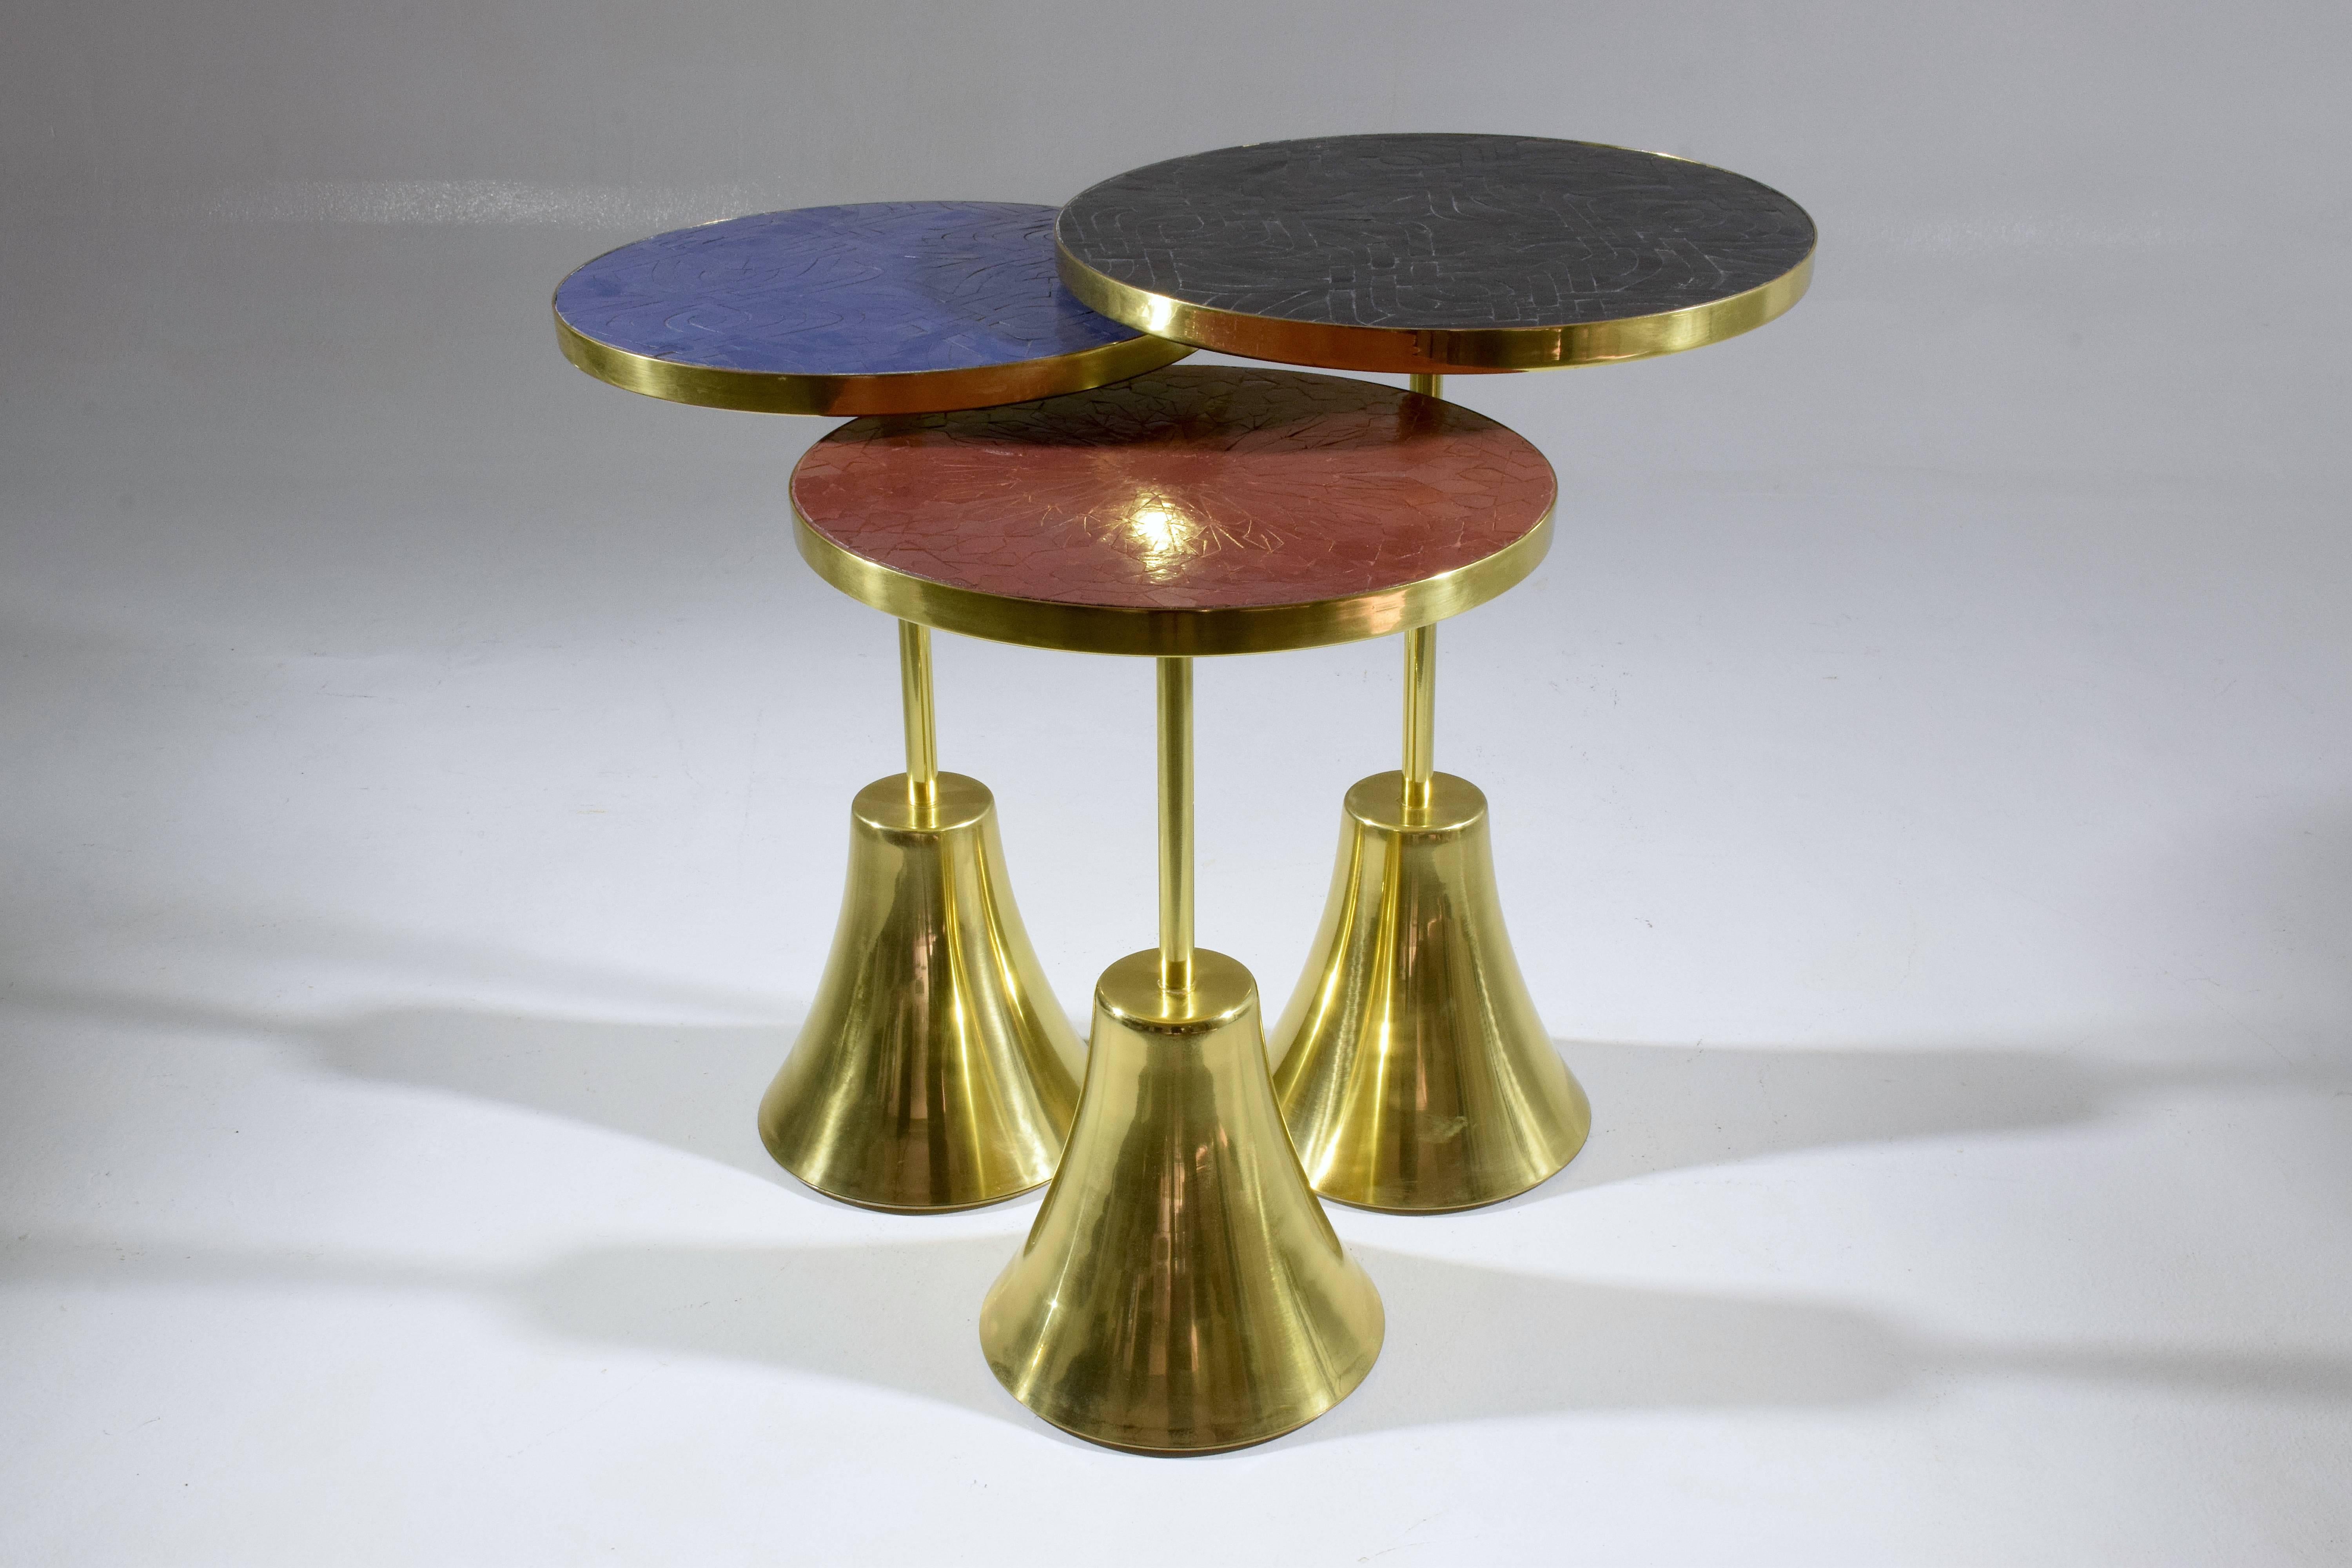 Set of three contemporary handcrafted guéridon side or end nesting tables composed of a solid brass structure and designed with two intricate mosaic tile tabletop zellige designs handmade with expert workmanship by Moroccan artisans. This set of